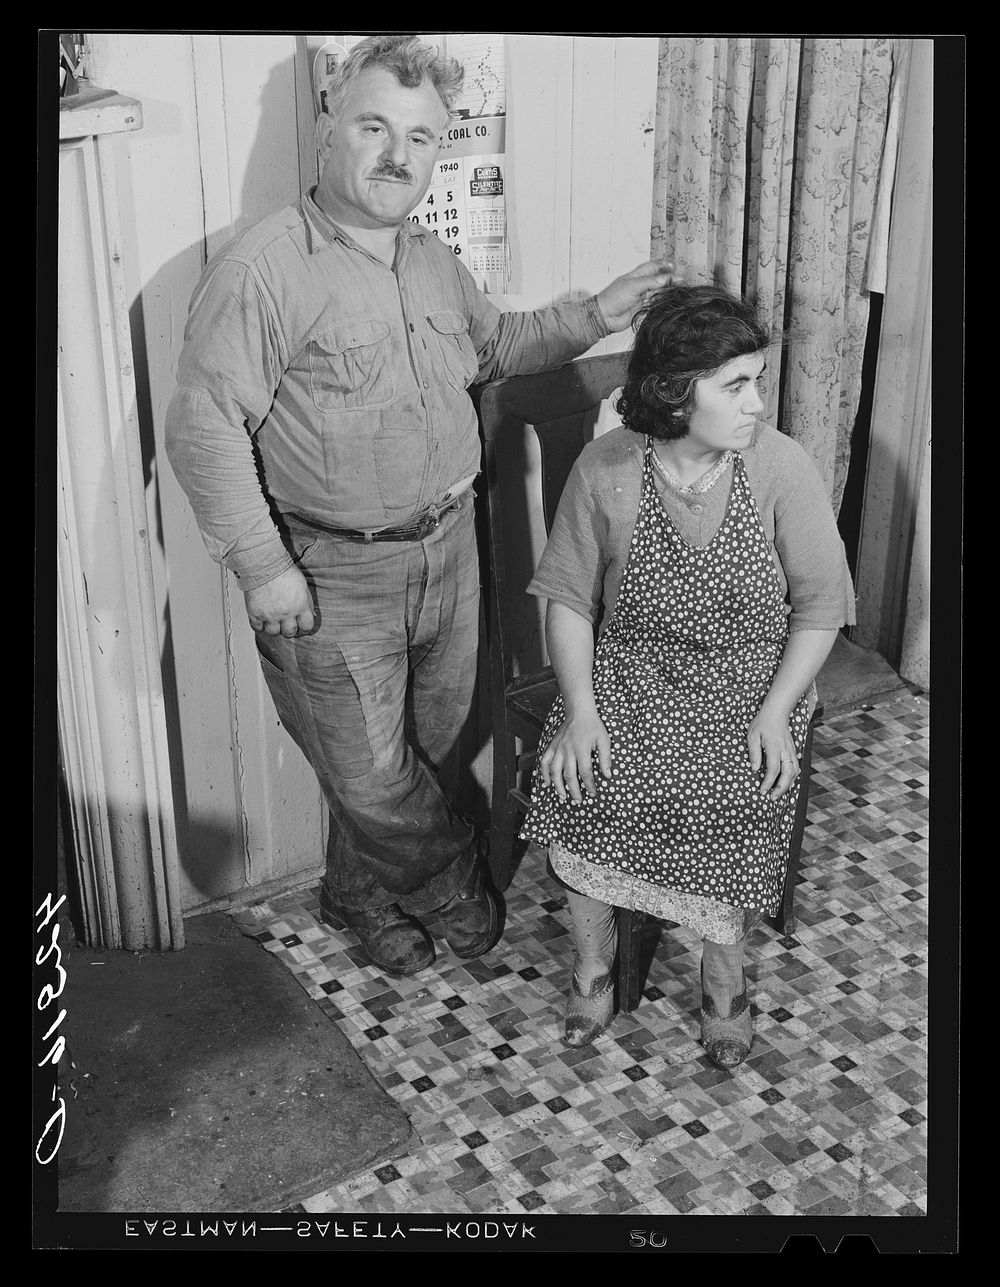 Mr. and Mrs. Constantina Da Nora, Italian farmers near Colchester, Connecticut. Sourced from the Library of Congress.